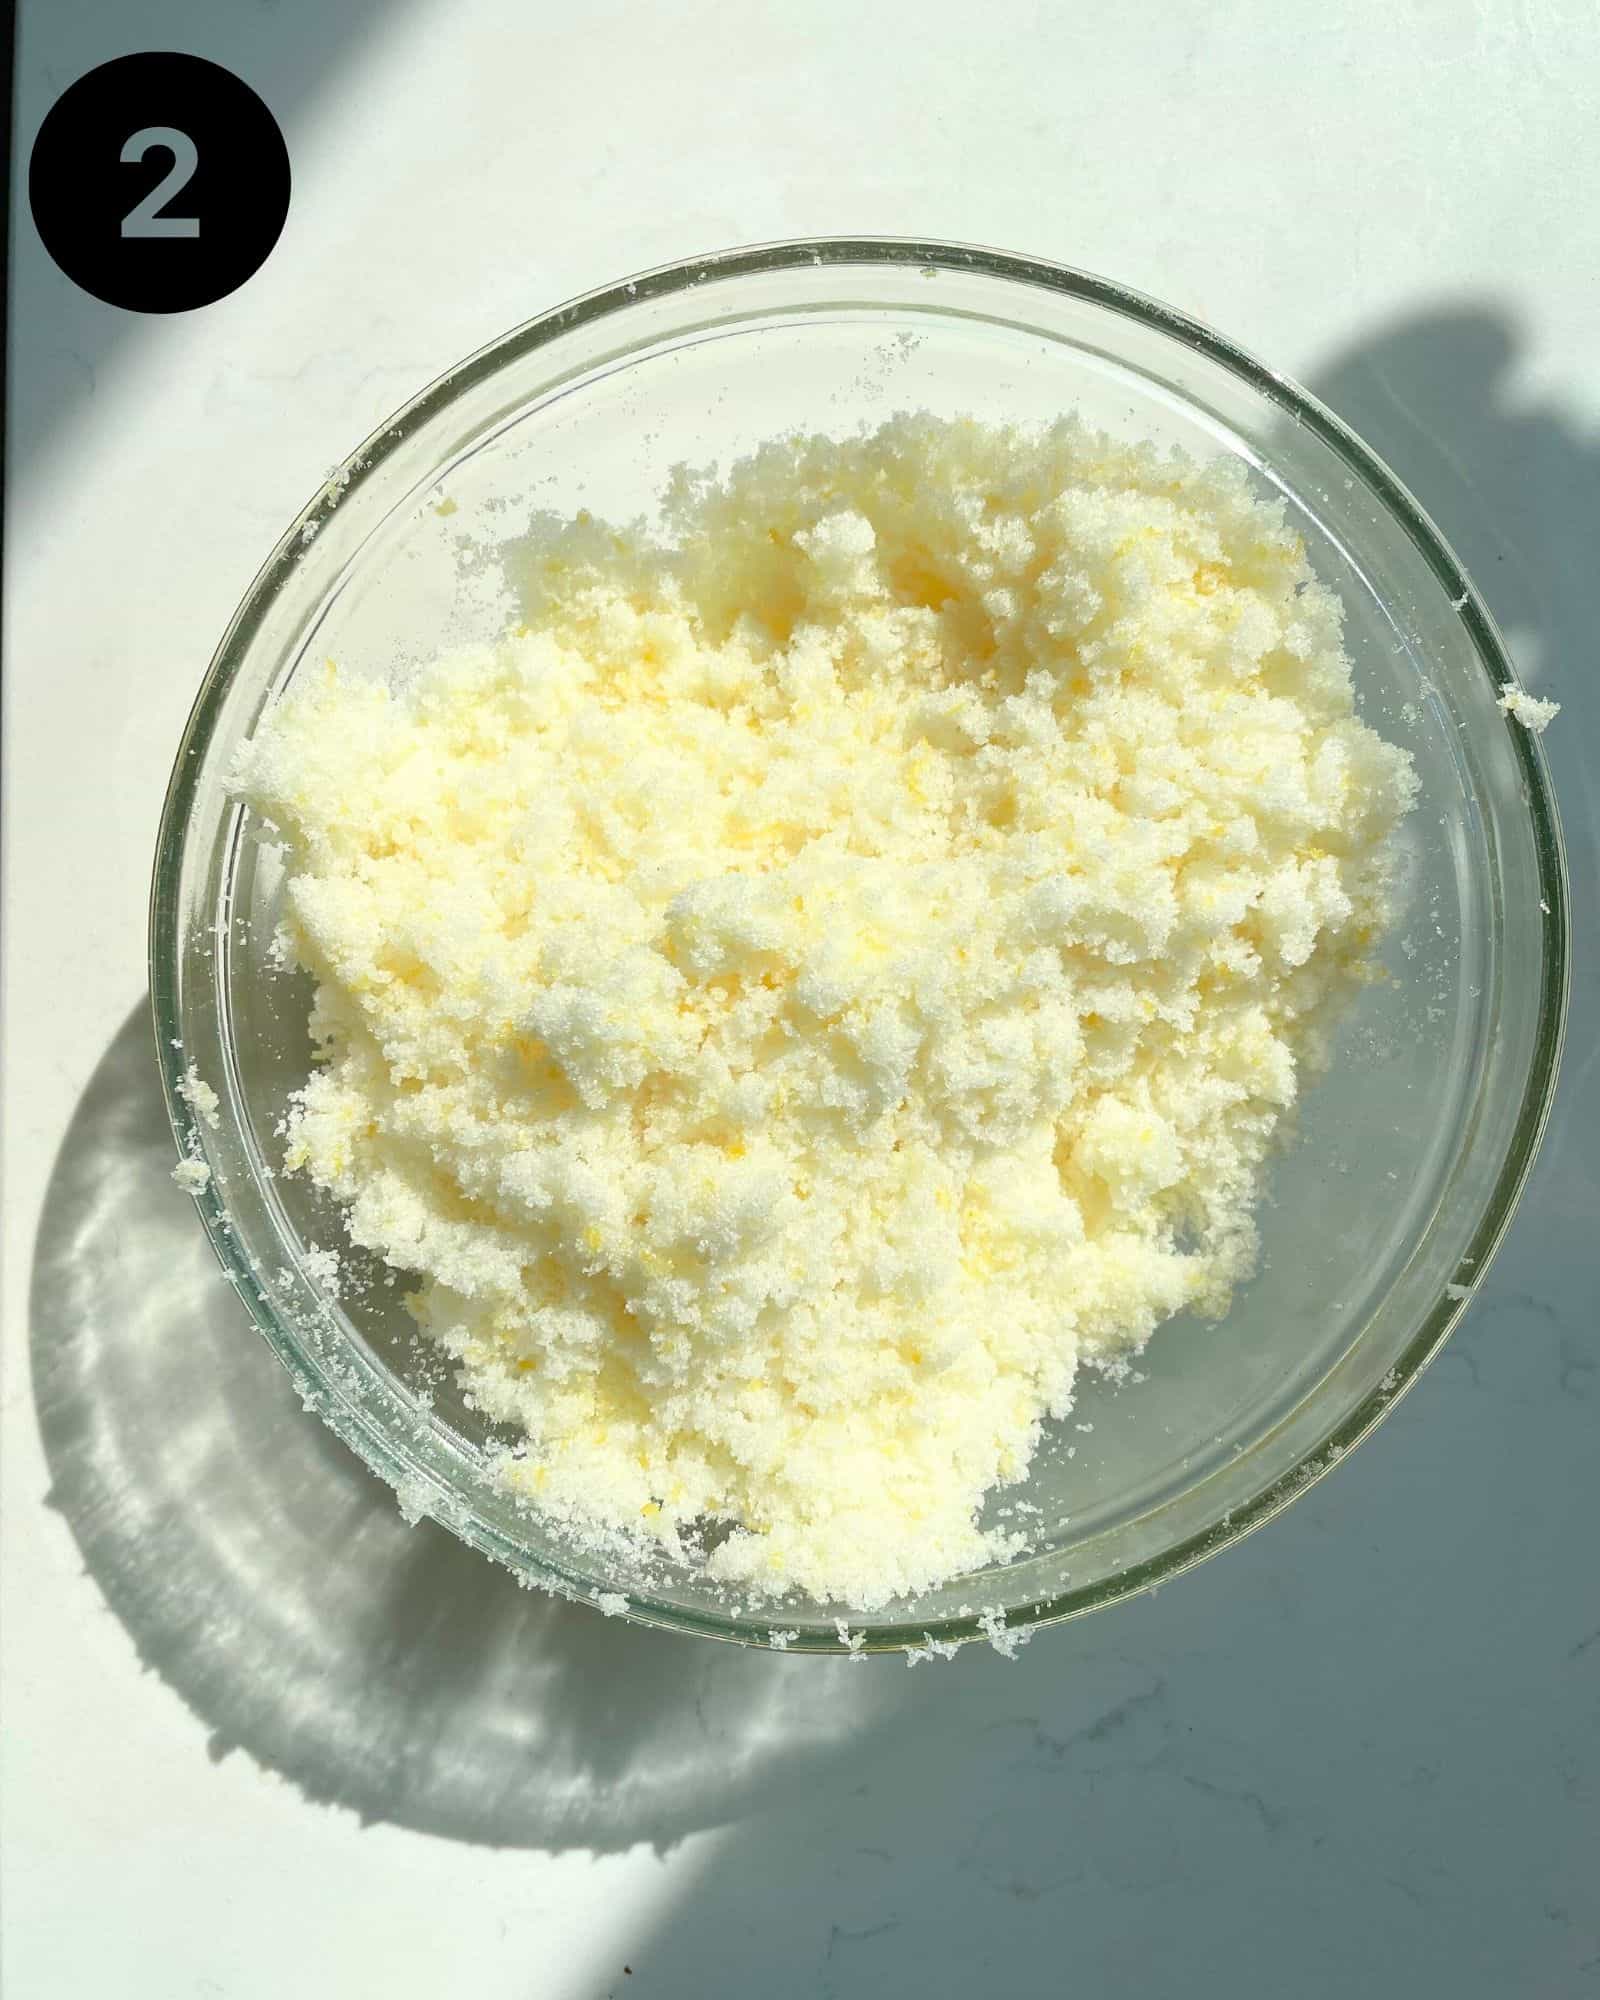 lemon zest and sugar mixed together in a mixing bowl.